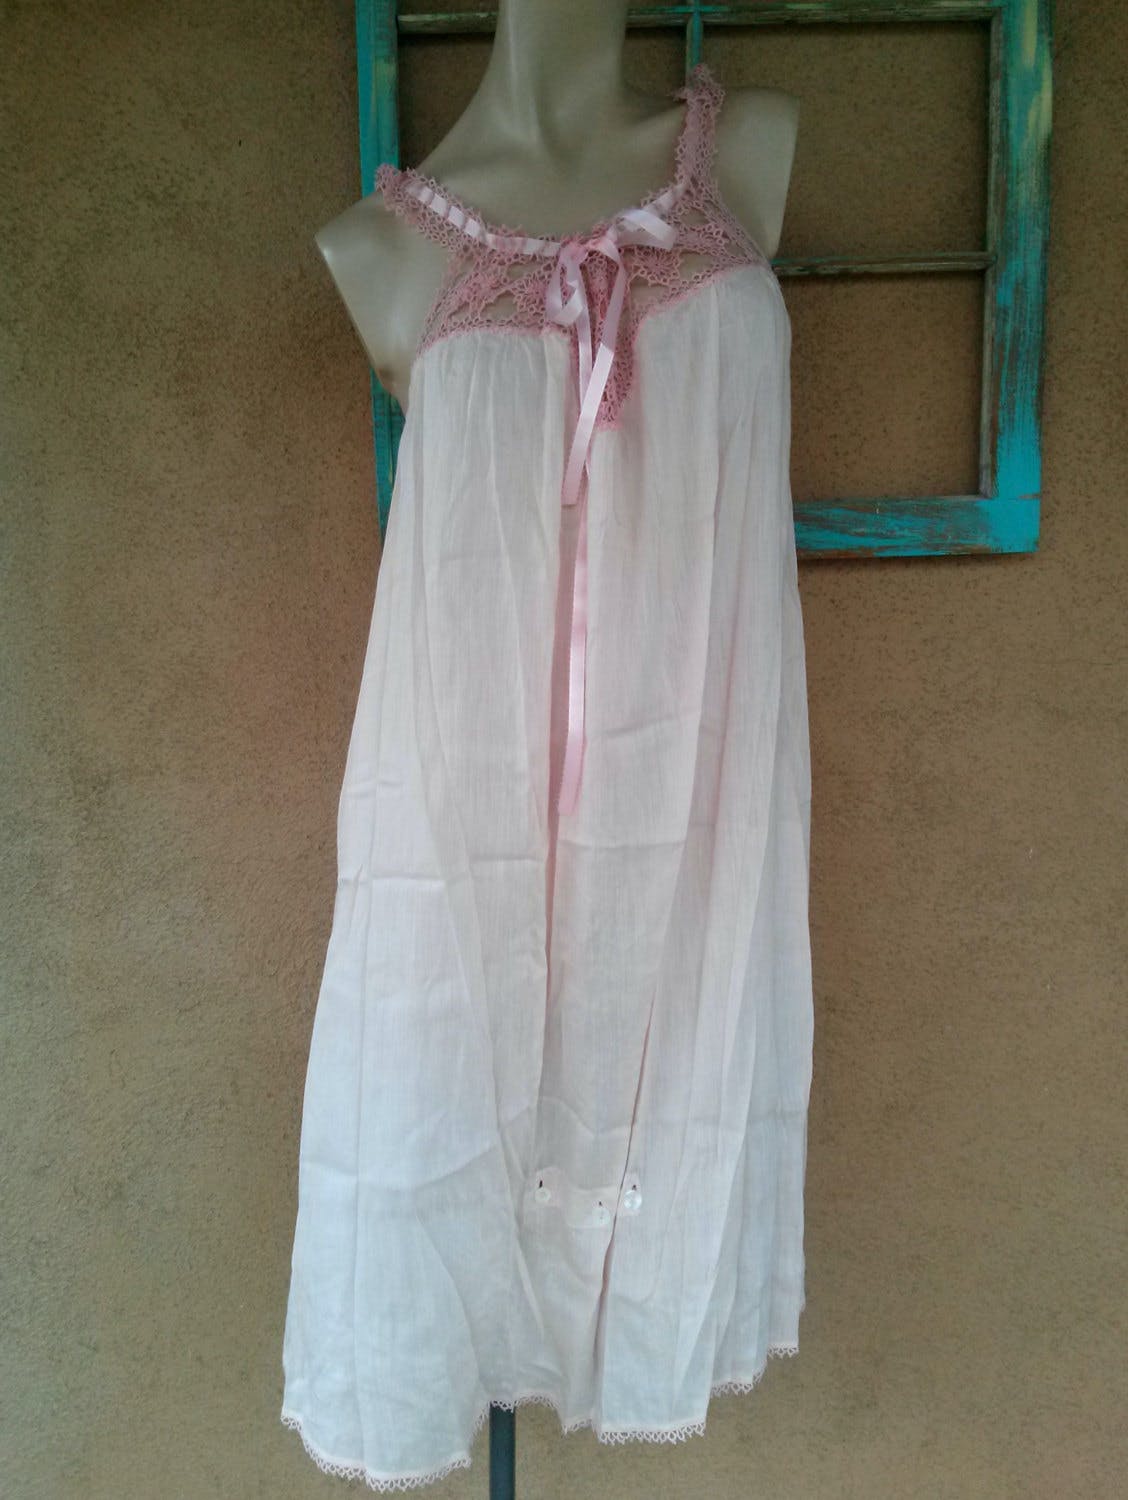 Vintage 20’s/30’s Pink Silky Cotton and Lace Nightgown | Shop THRILLING